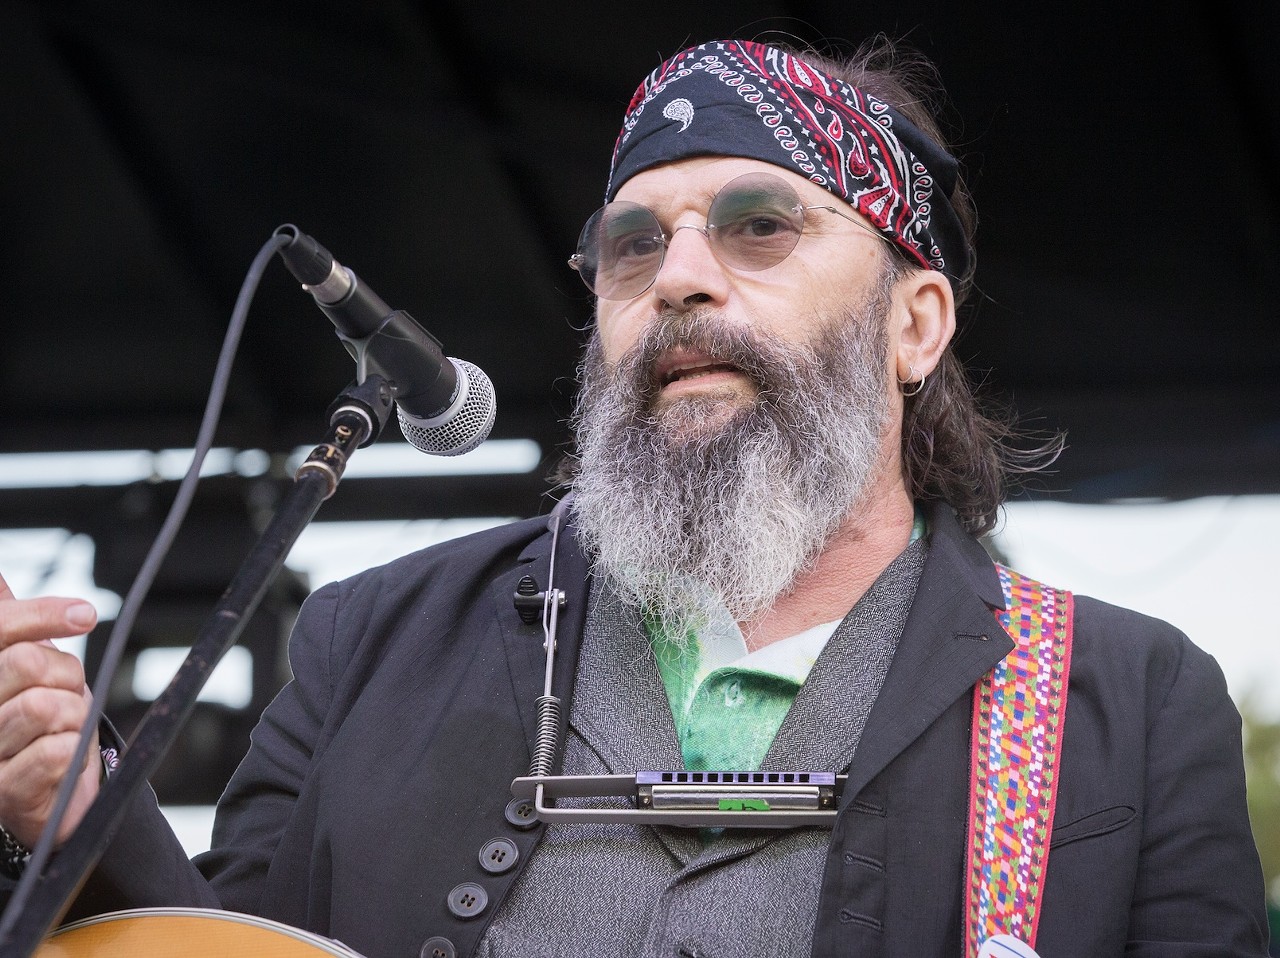 Steve Earle
Influential Americana singer-songwriter Steve Earle’s family moved to San Antonio when he was a young child. He dropped out of high school to pursue the musical life. By 1974, he’d split for Nashville.